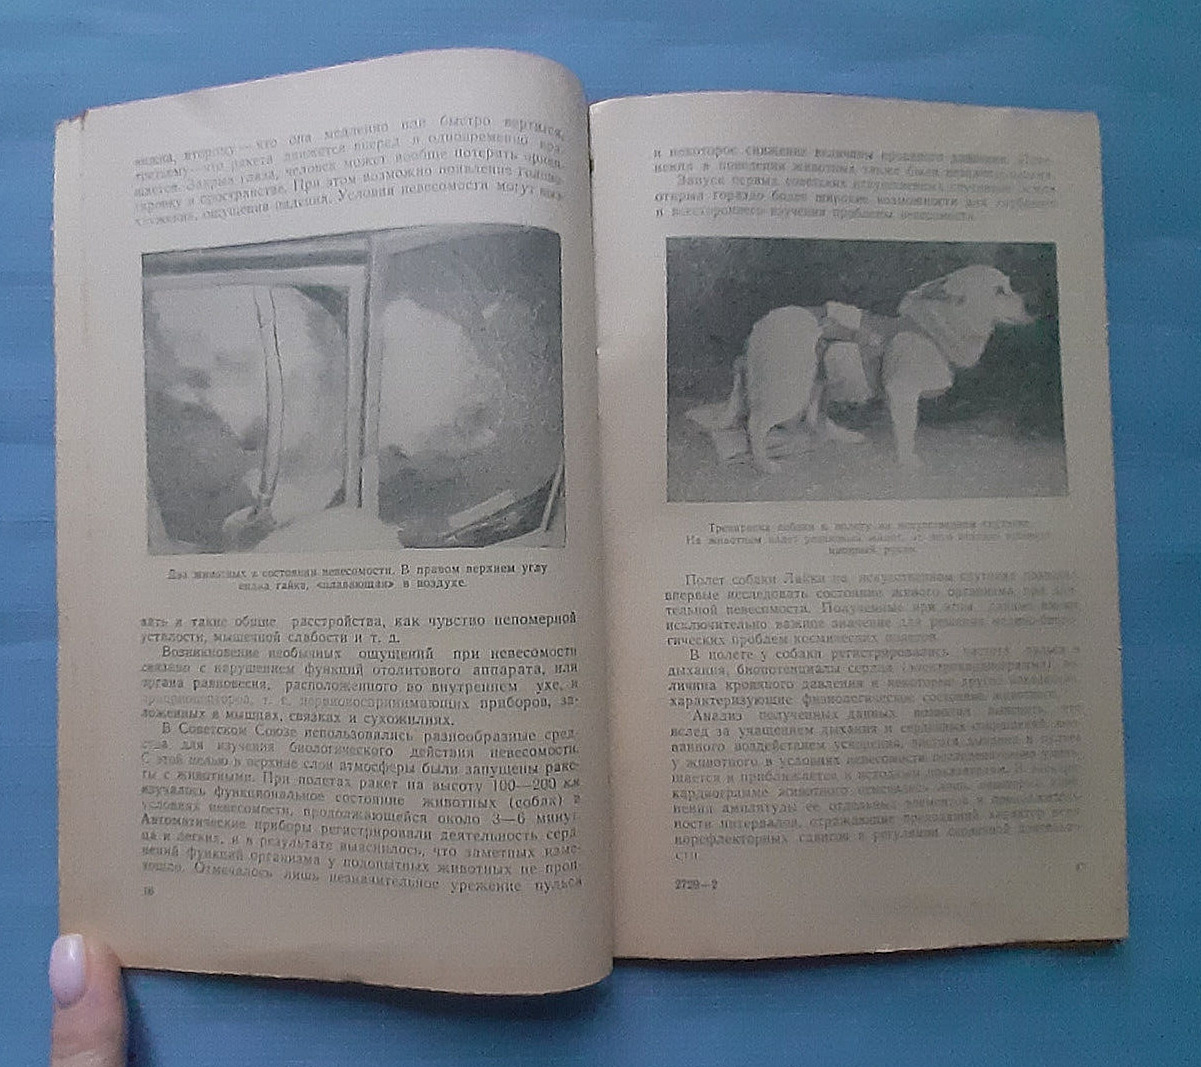 1958 Man in Space First cosmonaut dogs Laika Astronauts spacesuit Russian book